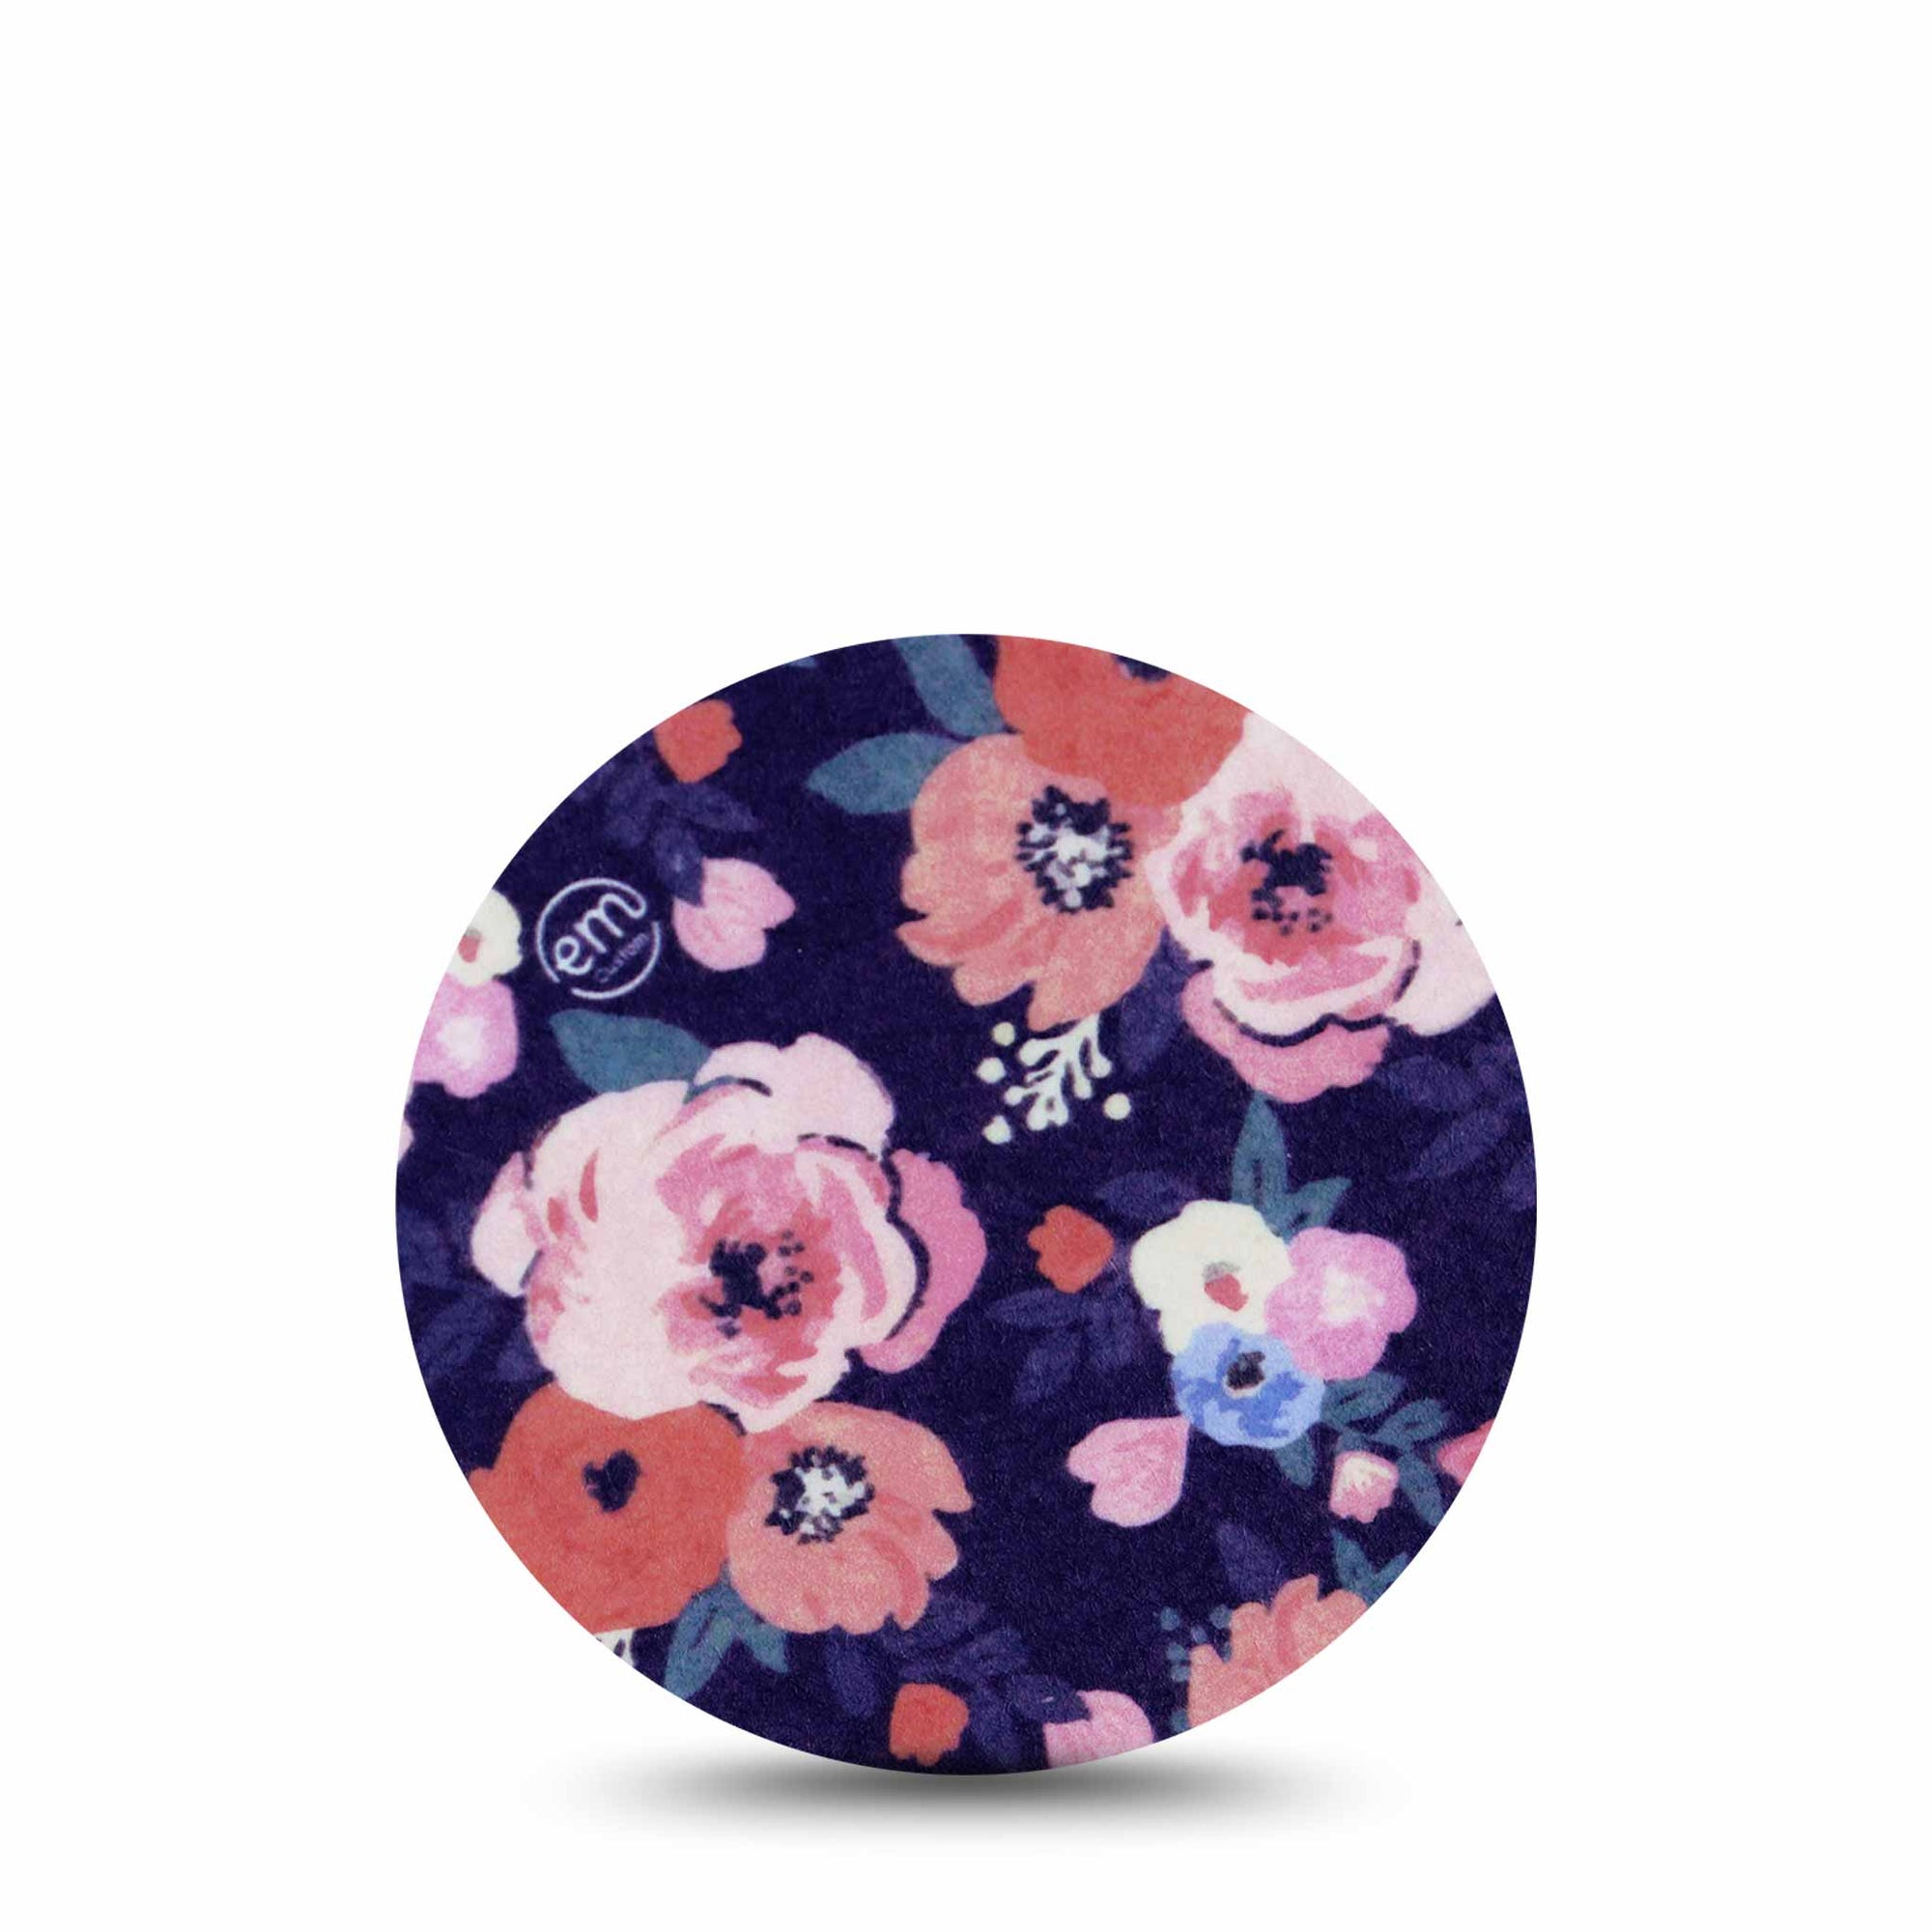 ExpressionMed Painted Flower Libre Overpatch, Abbott Lingo